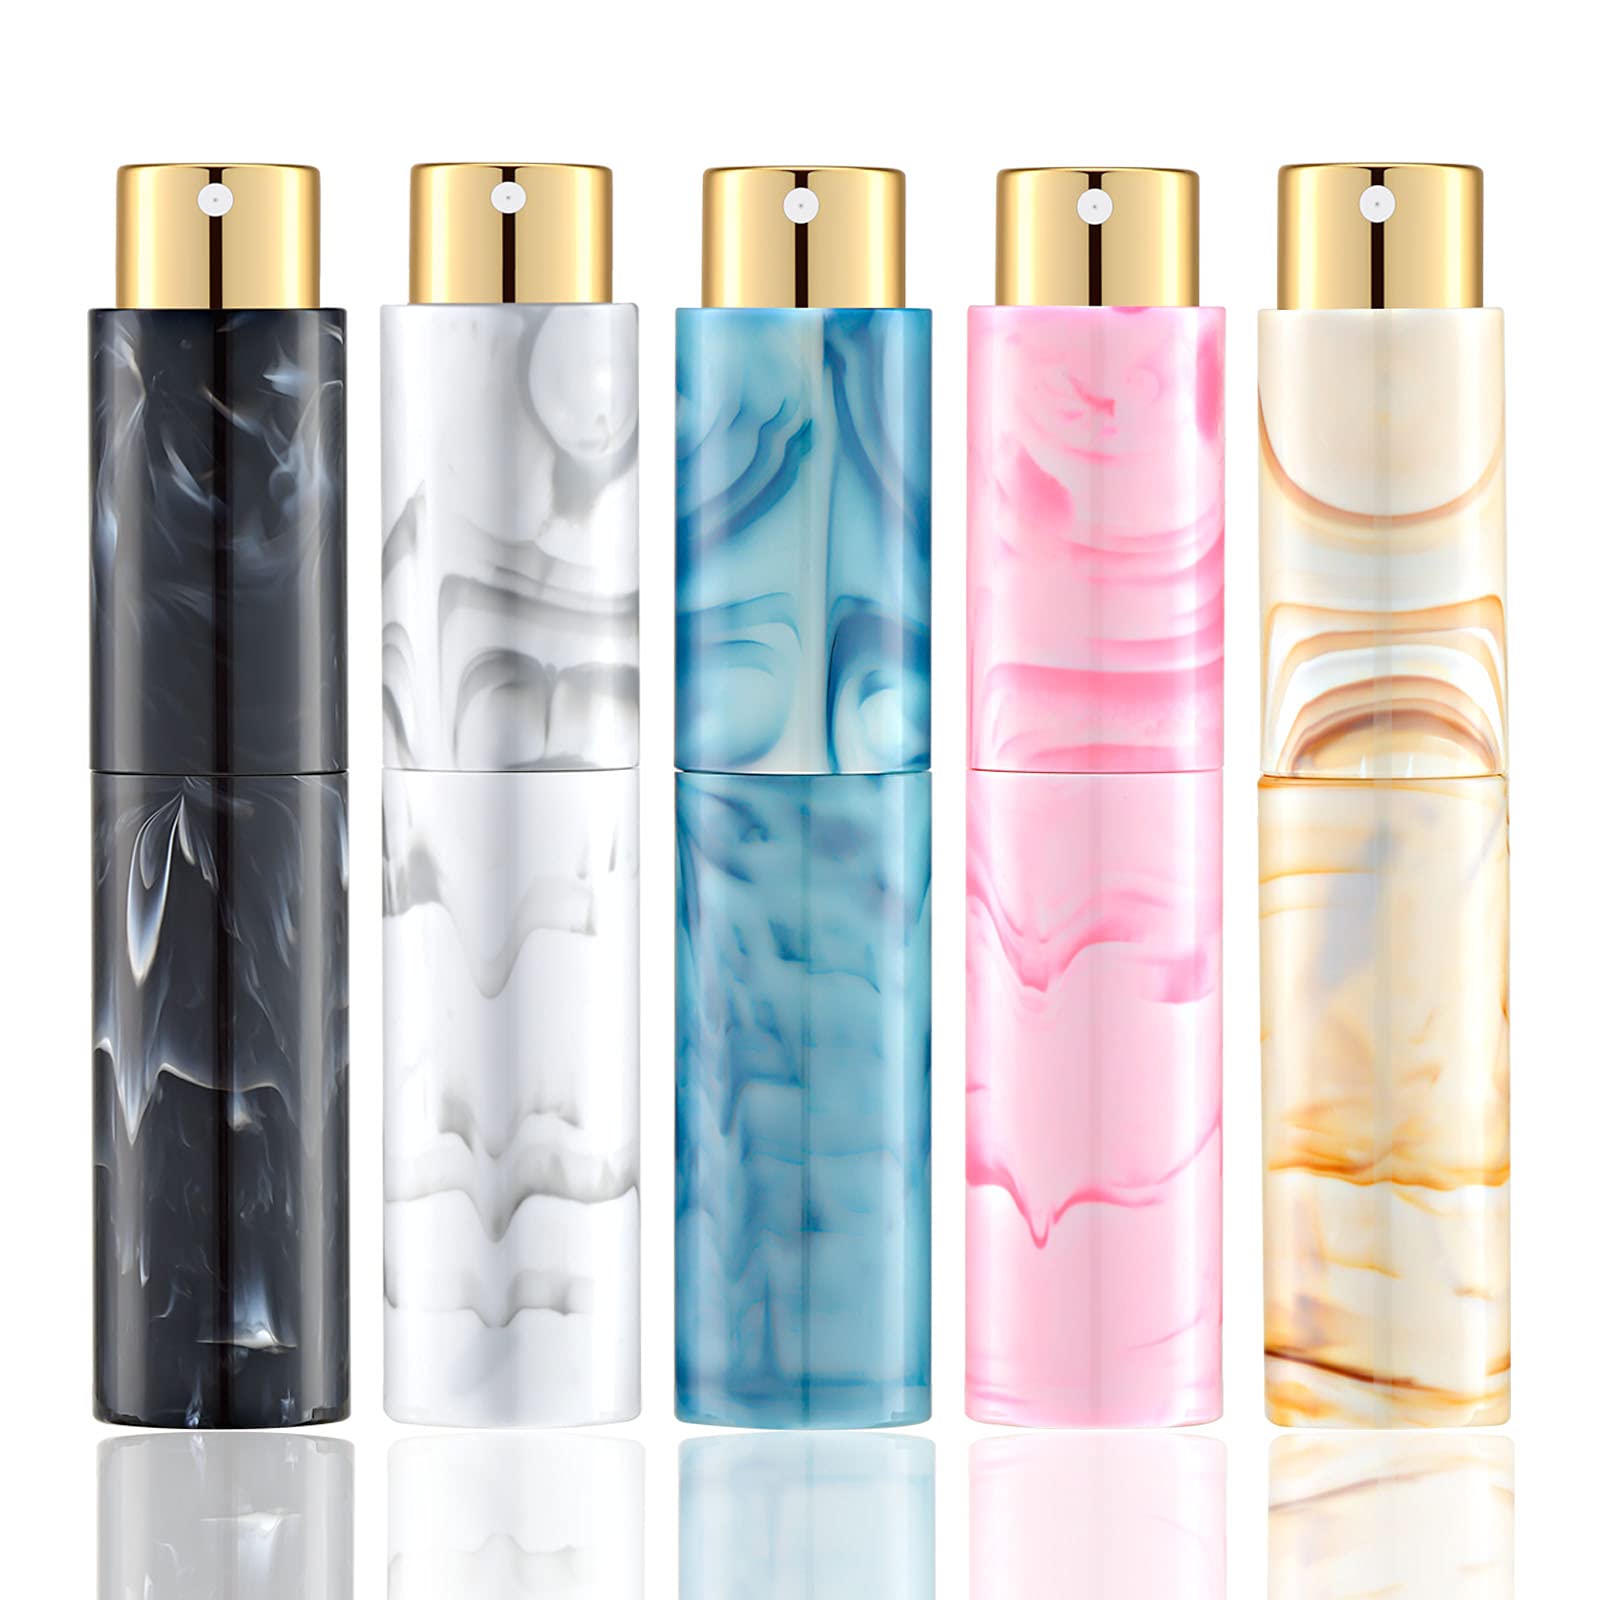 top quality brand my way mini set perfume floral long lasting natural taste  with atomizer for men fragrances _ - AliExpress Mobile